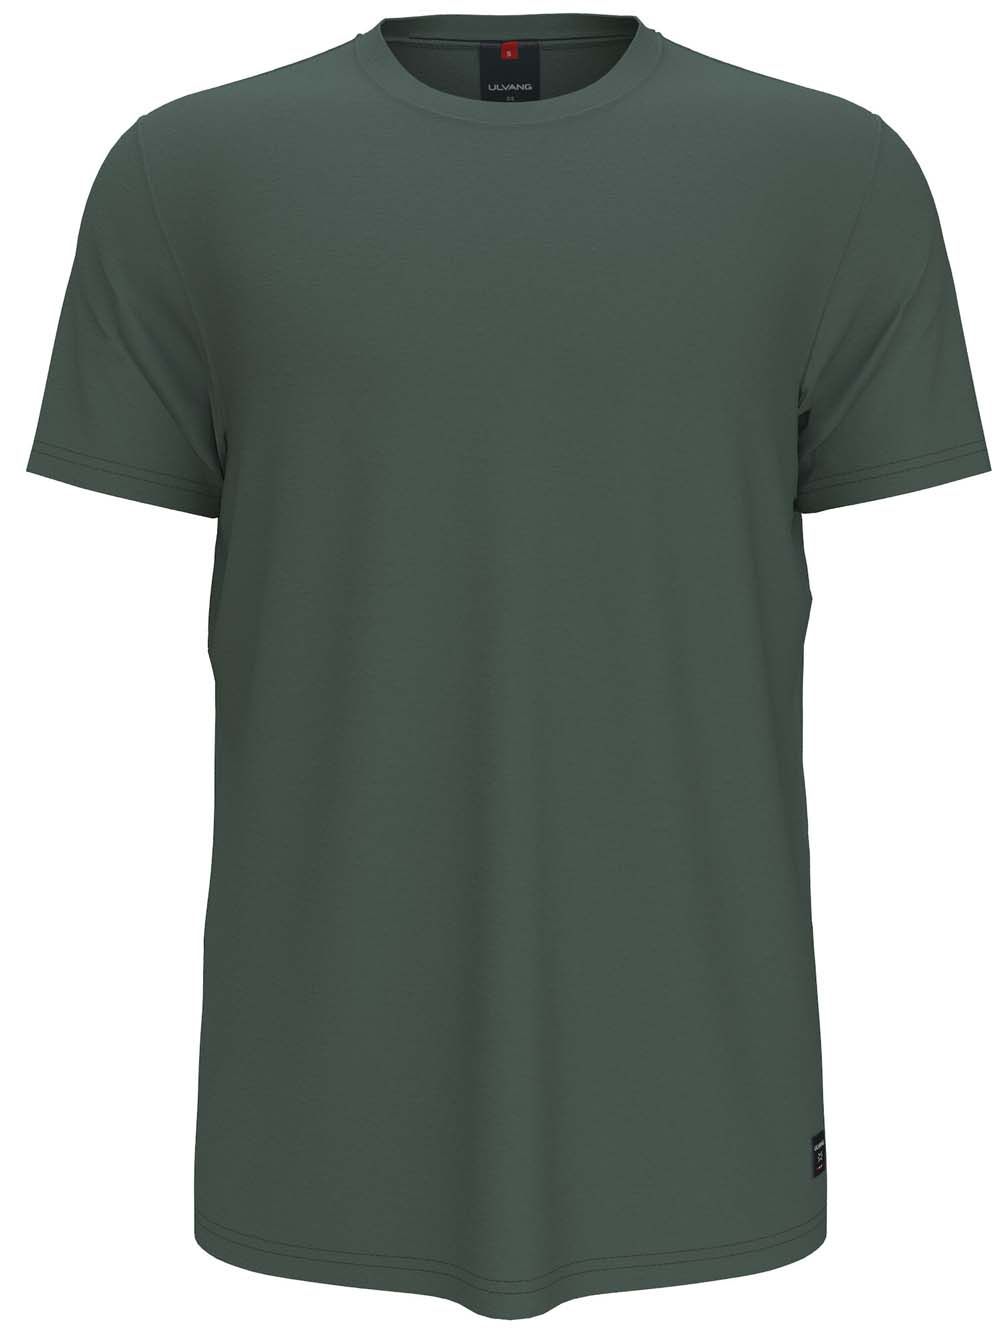 Ulvang Eio Solid Tee Mens Trecking Green